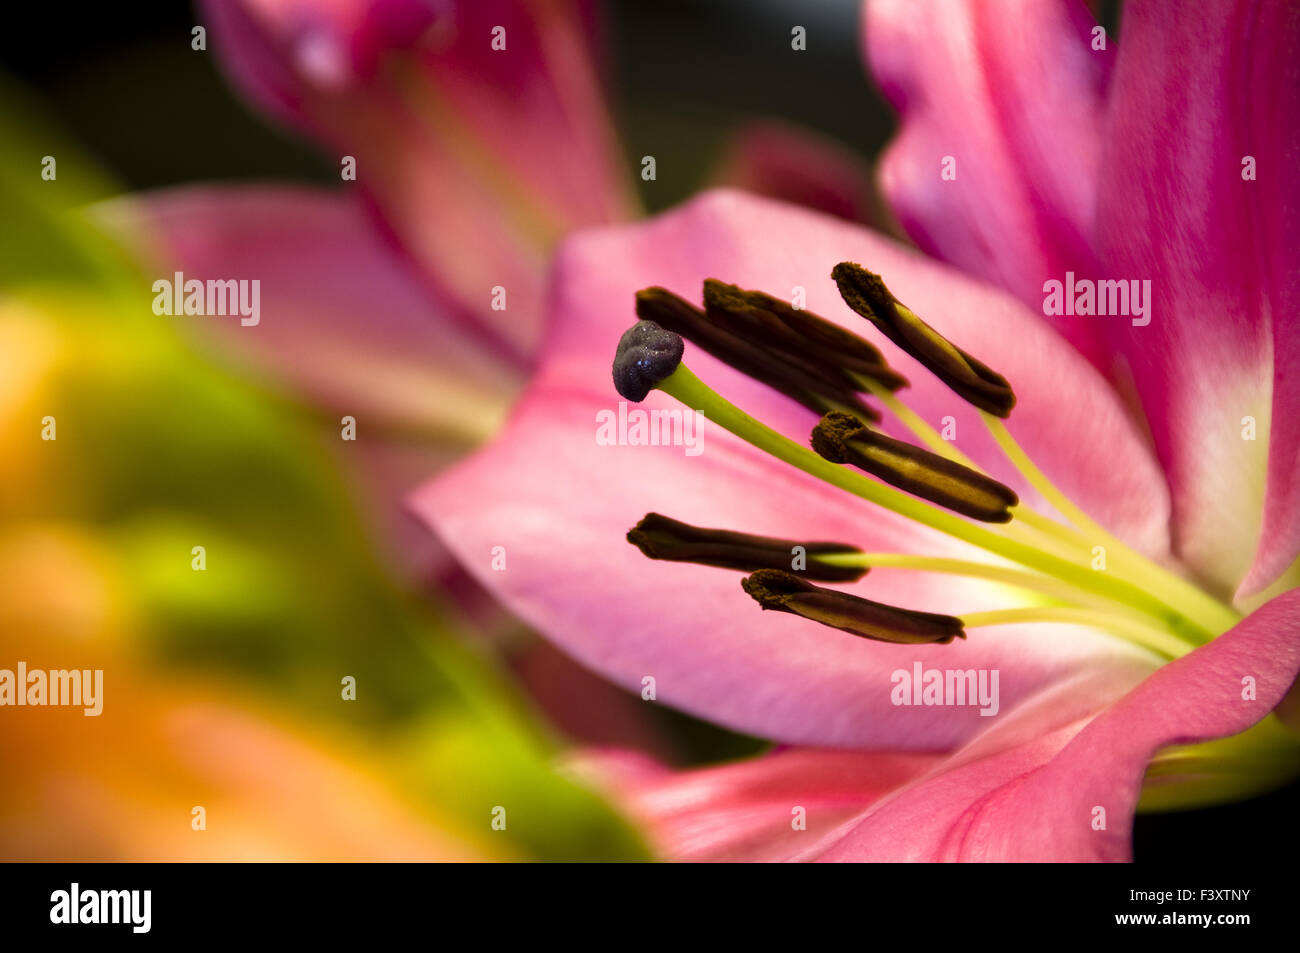 The close up of lilies over dark background Stock Photo